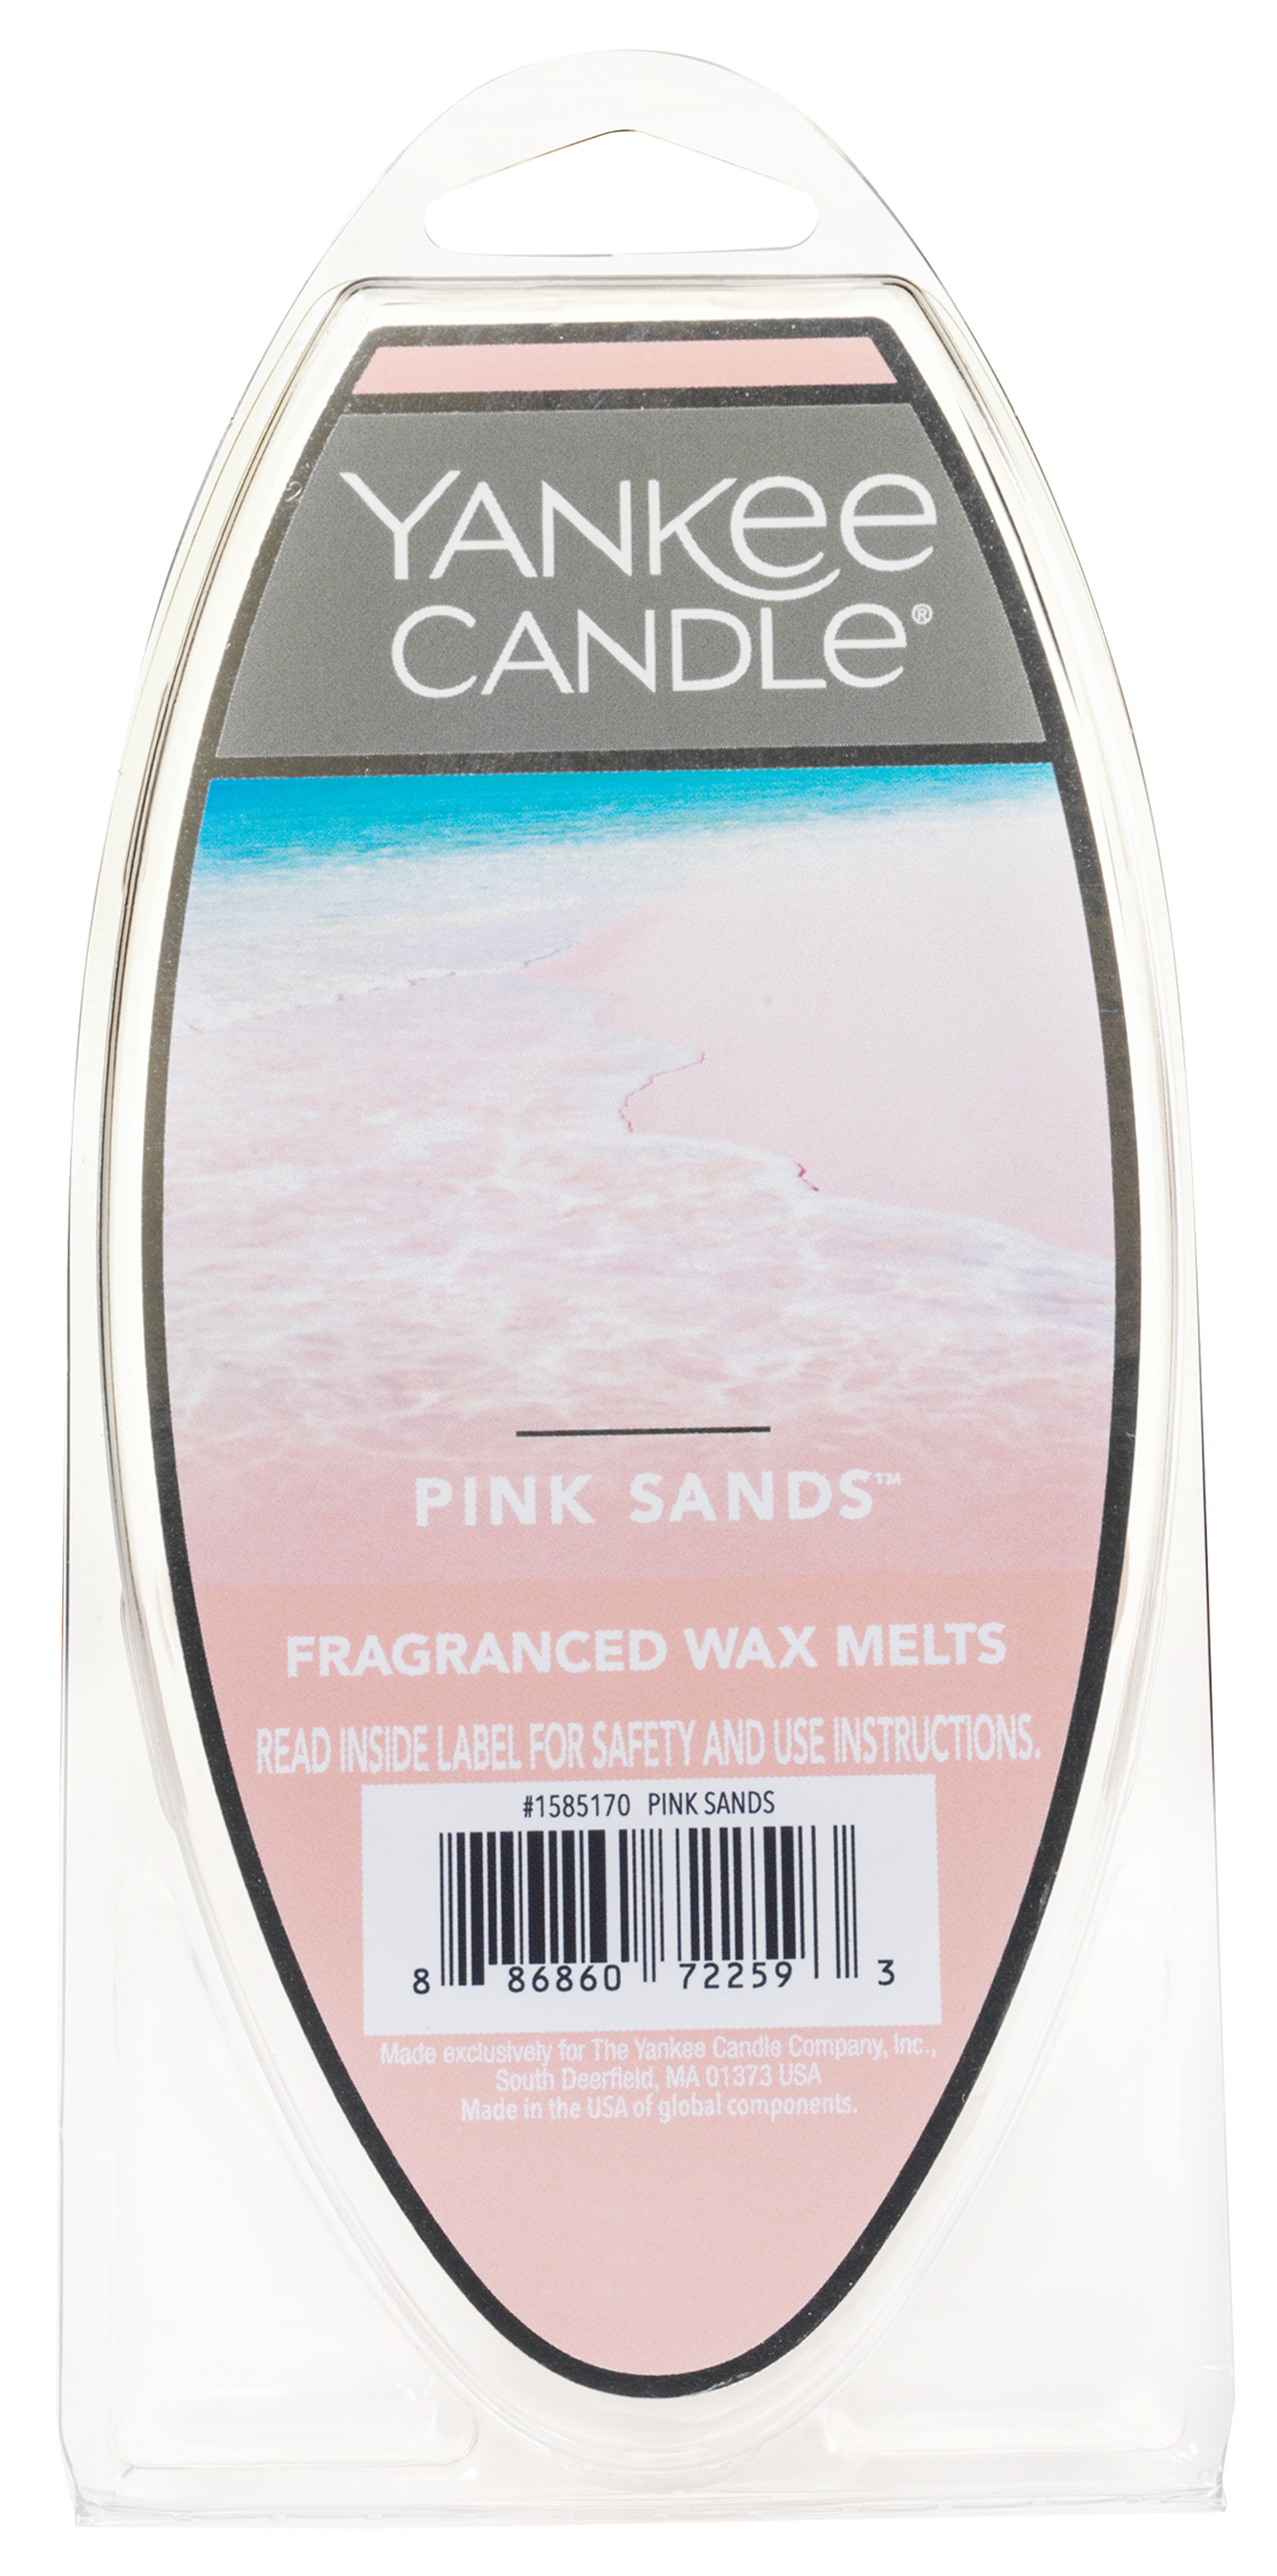 Save on Yankee Candle Home Inspiration Fragranced Wax Melts Pink